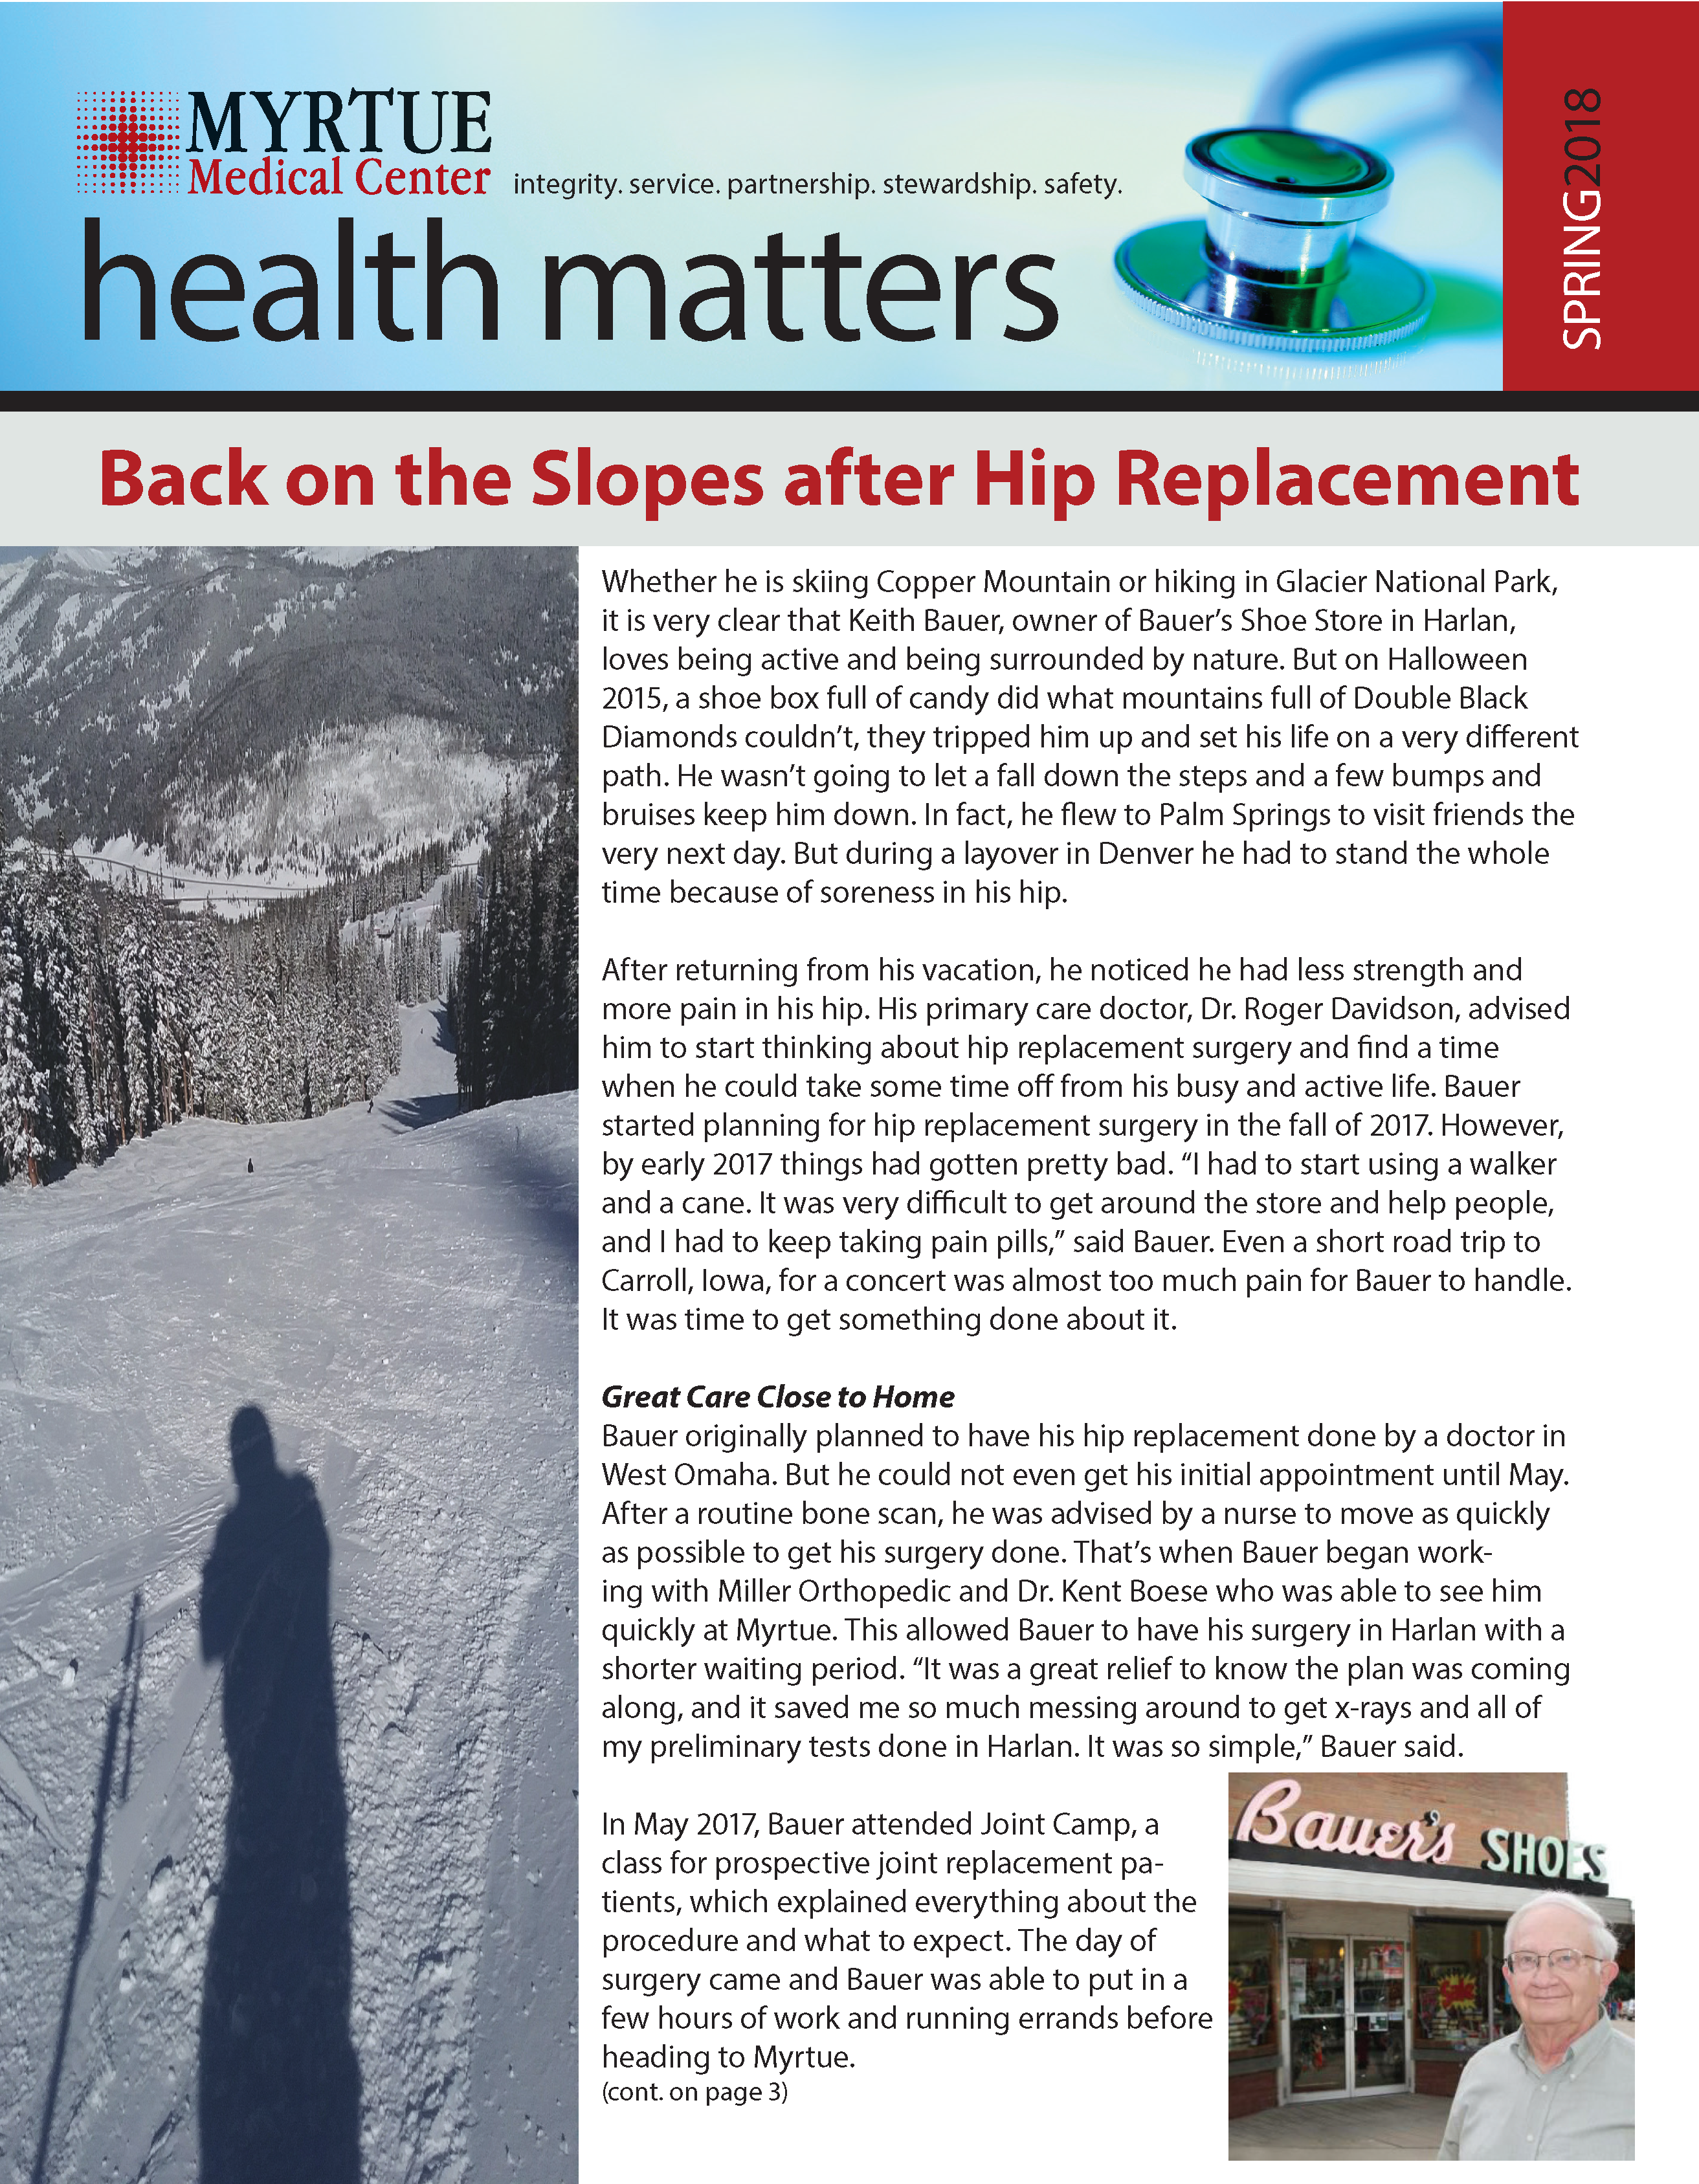 Back-on-the-Slopes-After-Hip-Replacement